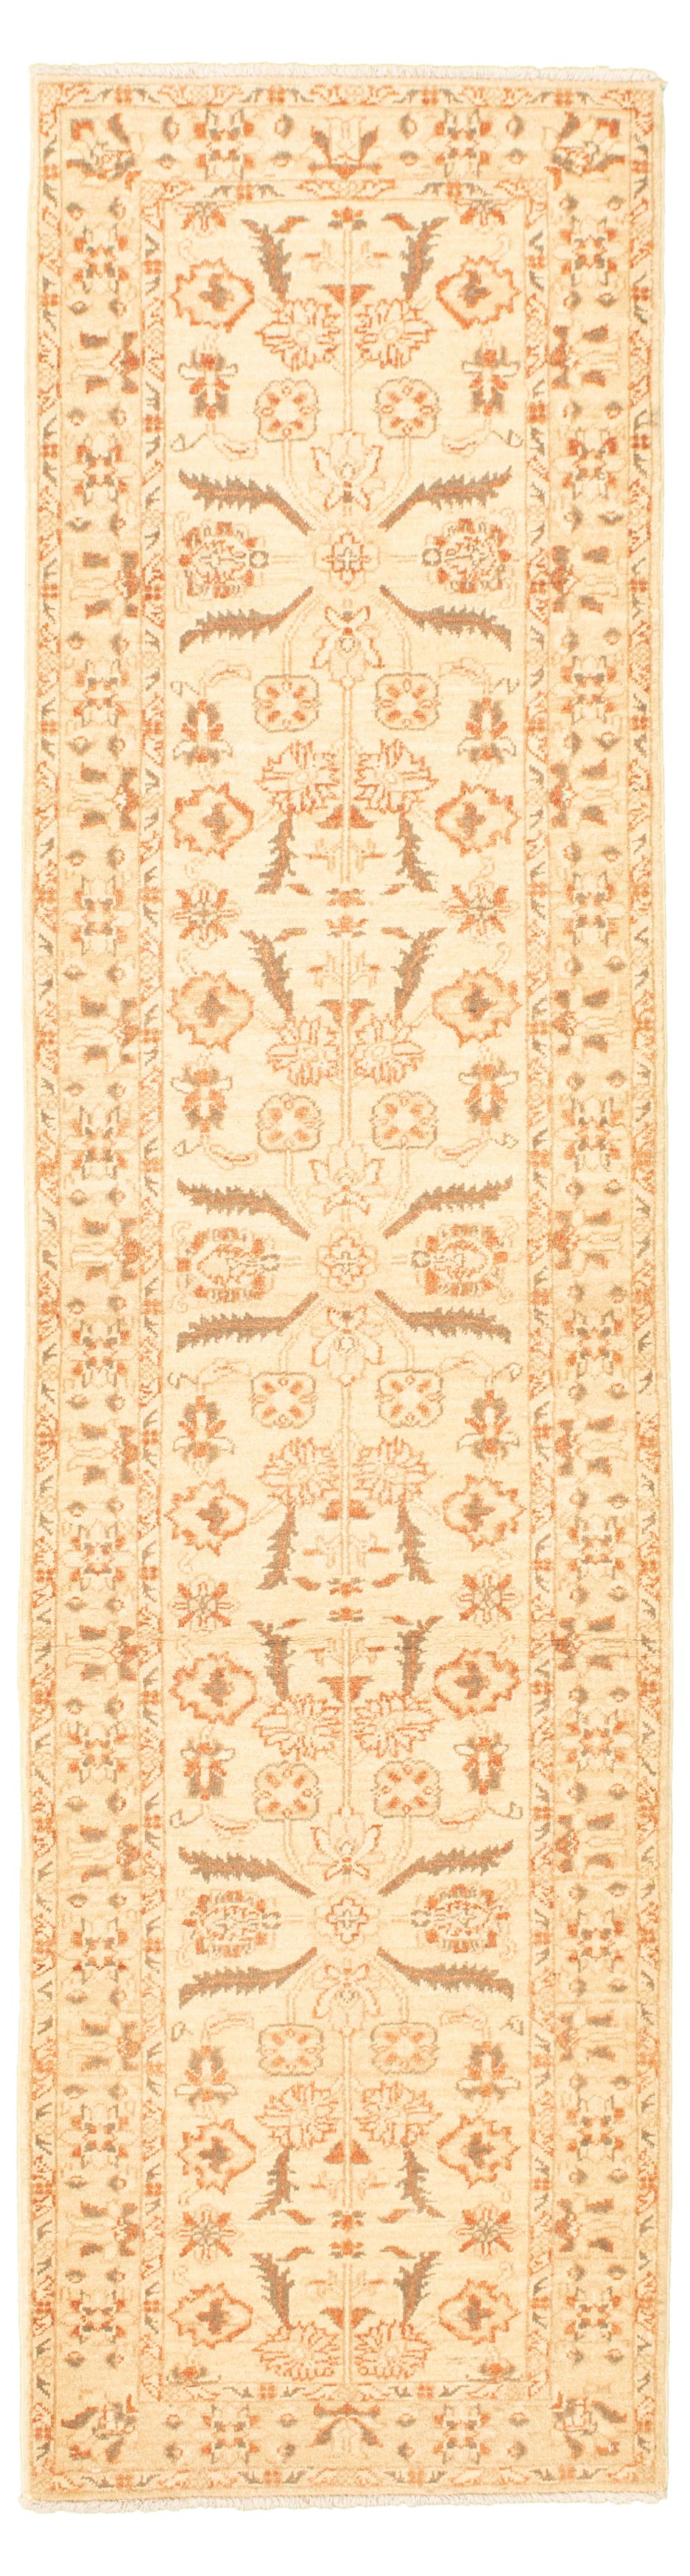 Hand-knotted Chobi Finest Cream Wool Rug 2'7" x 10'3" Size: 2'7" x 10'3"  